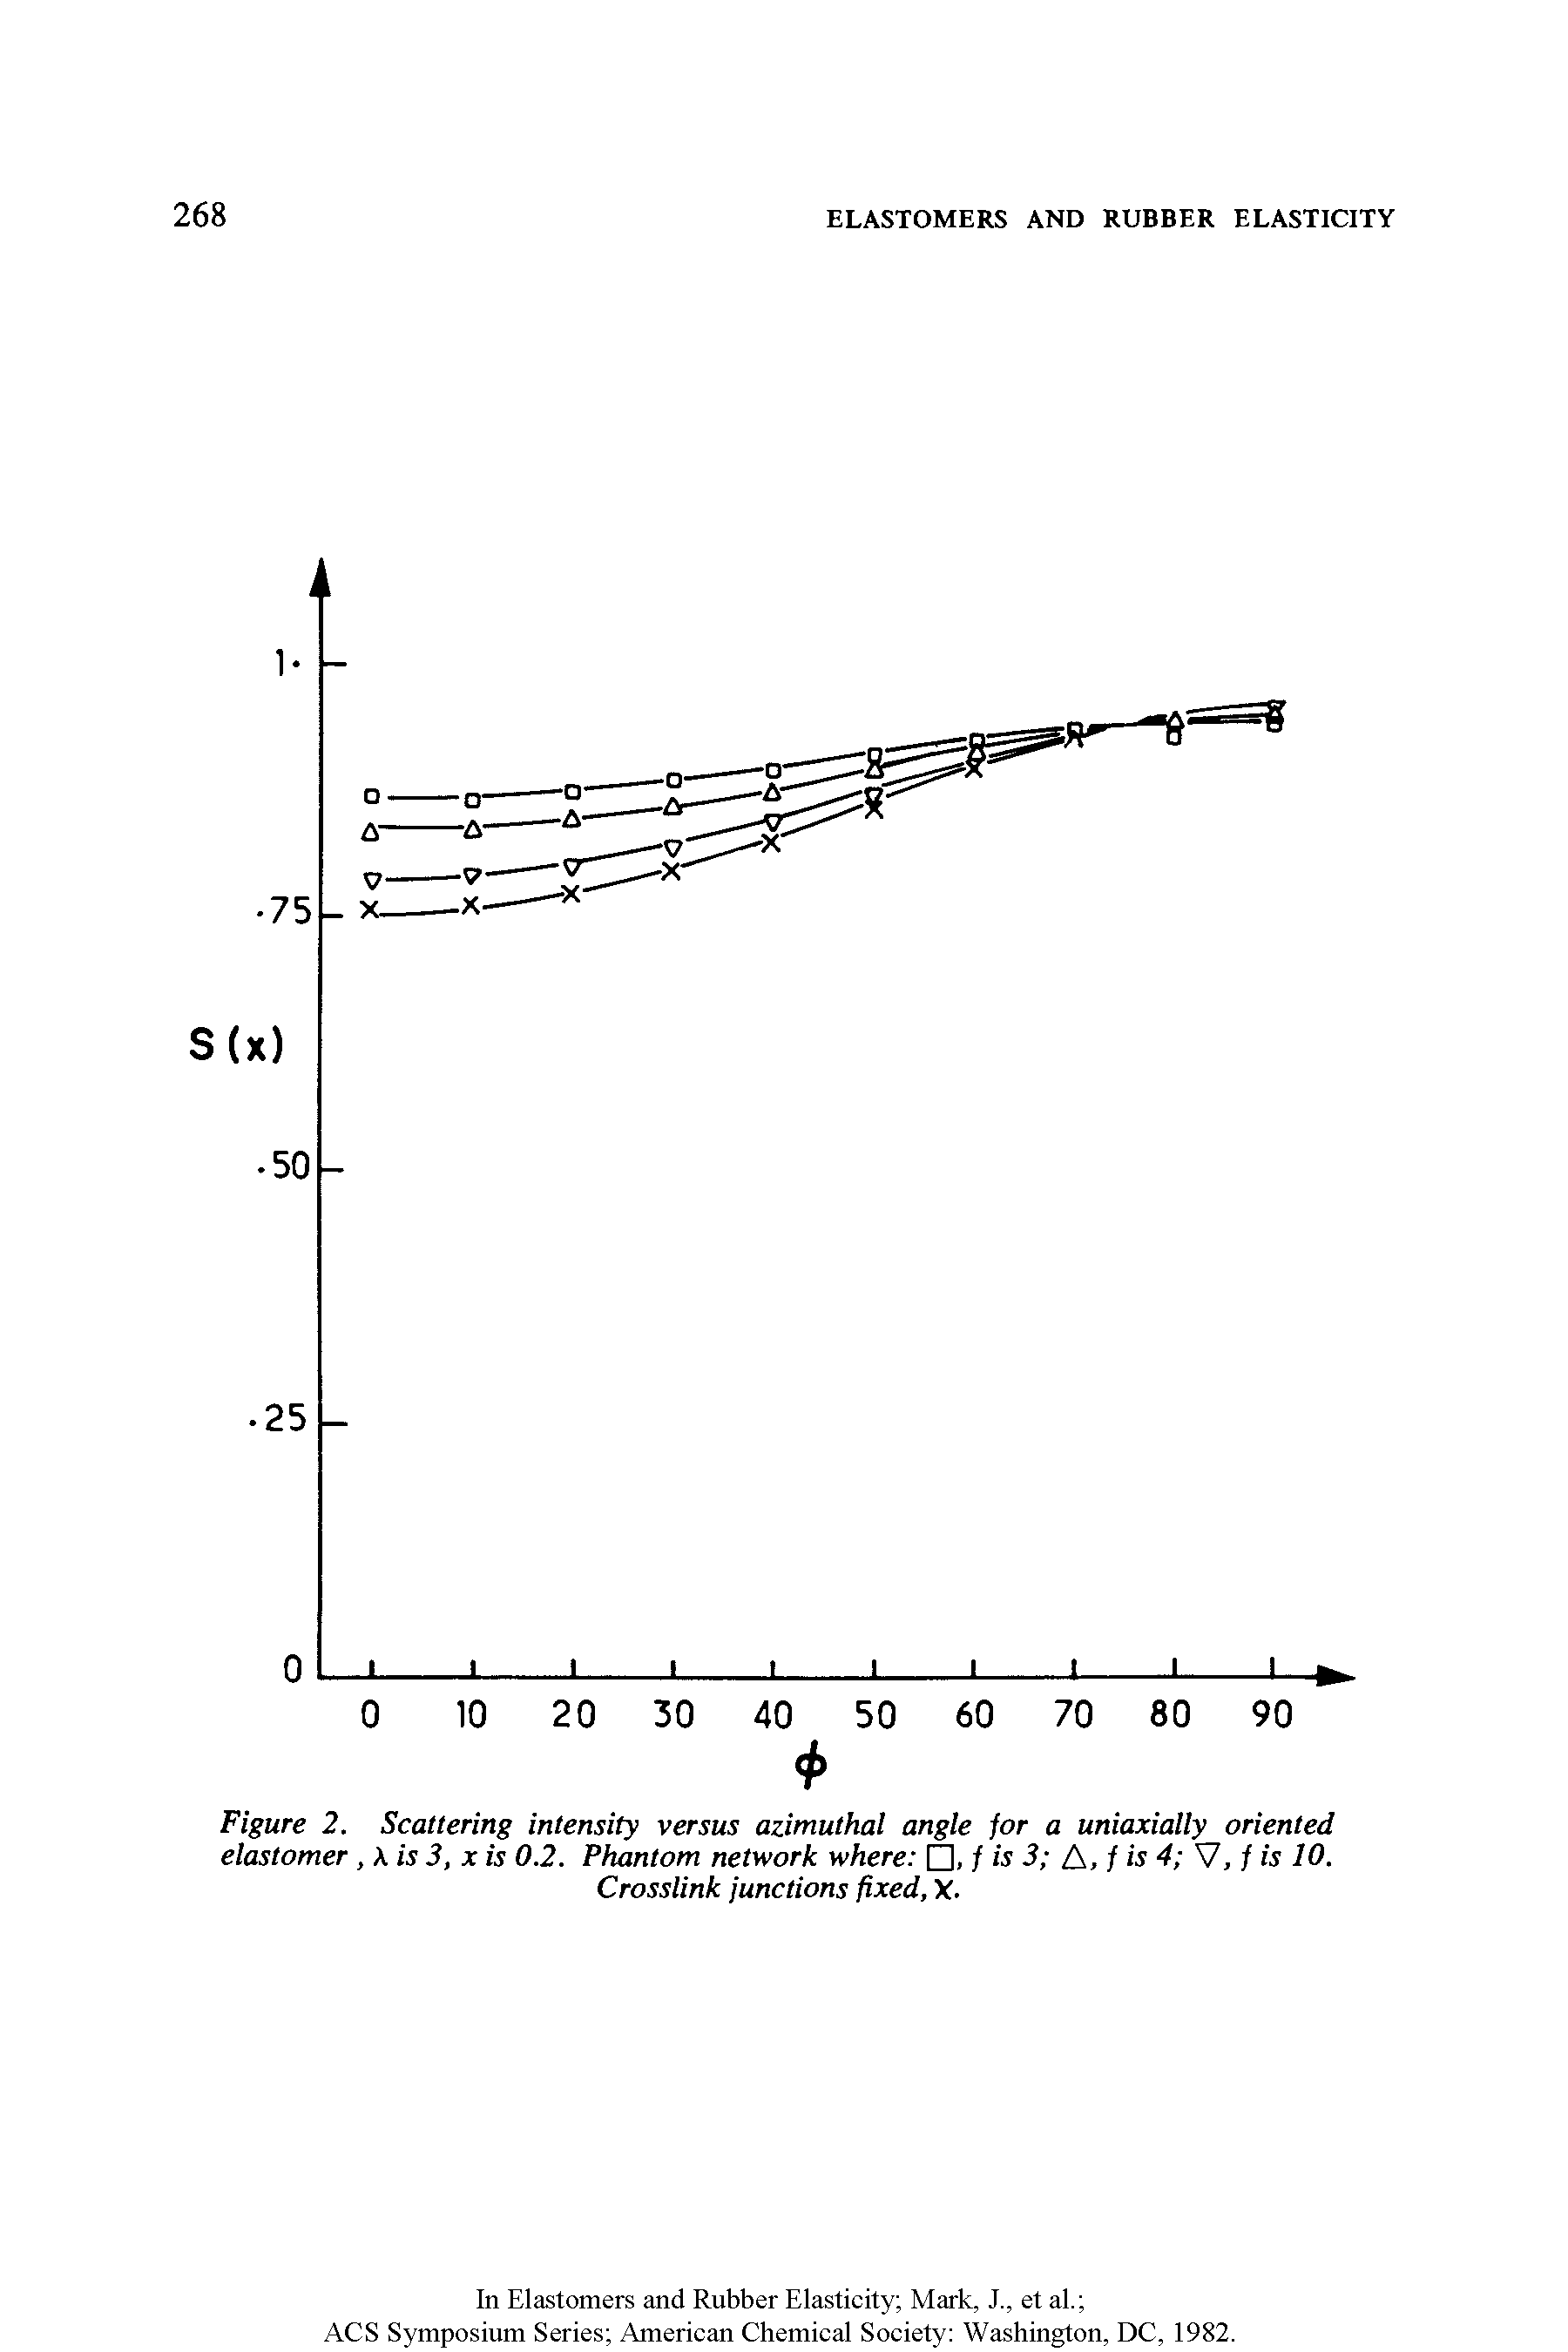 Figure 2. Scattering intensity versus azimuthal angle for a uniaxially oriented elastomer, X is 3, x is 0.2. Phantom network where , f is 3 A, f is 4 V, f is 10. Crosslink junctions fixed, X.